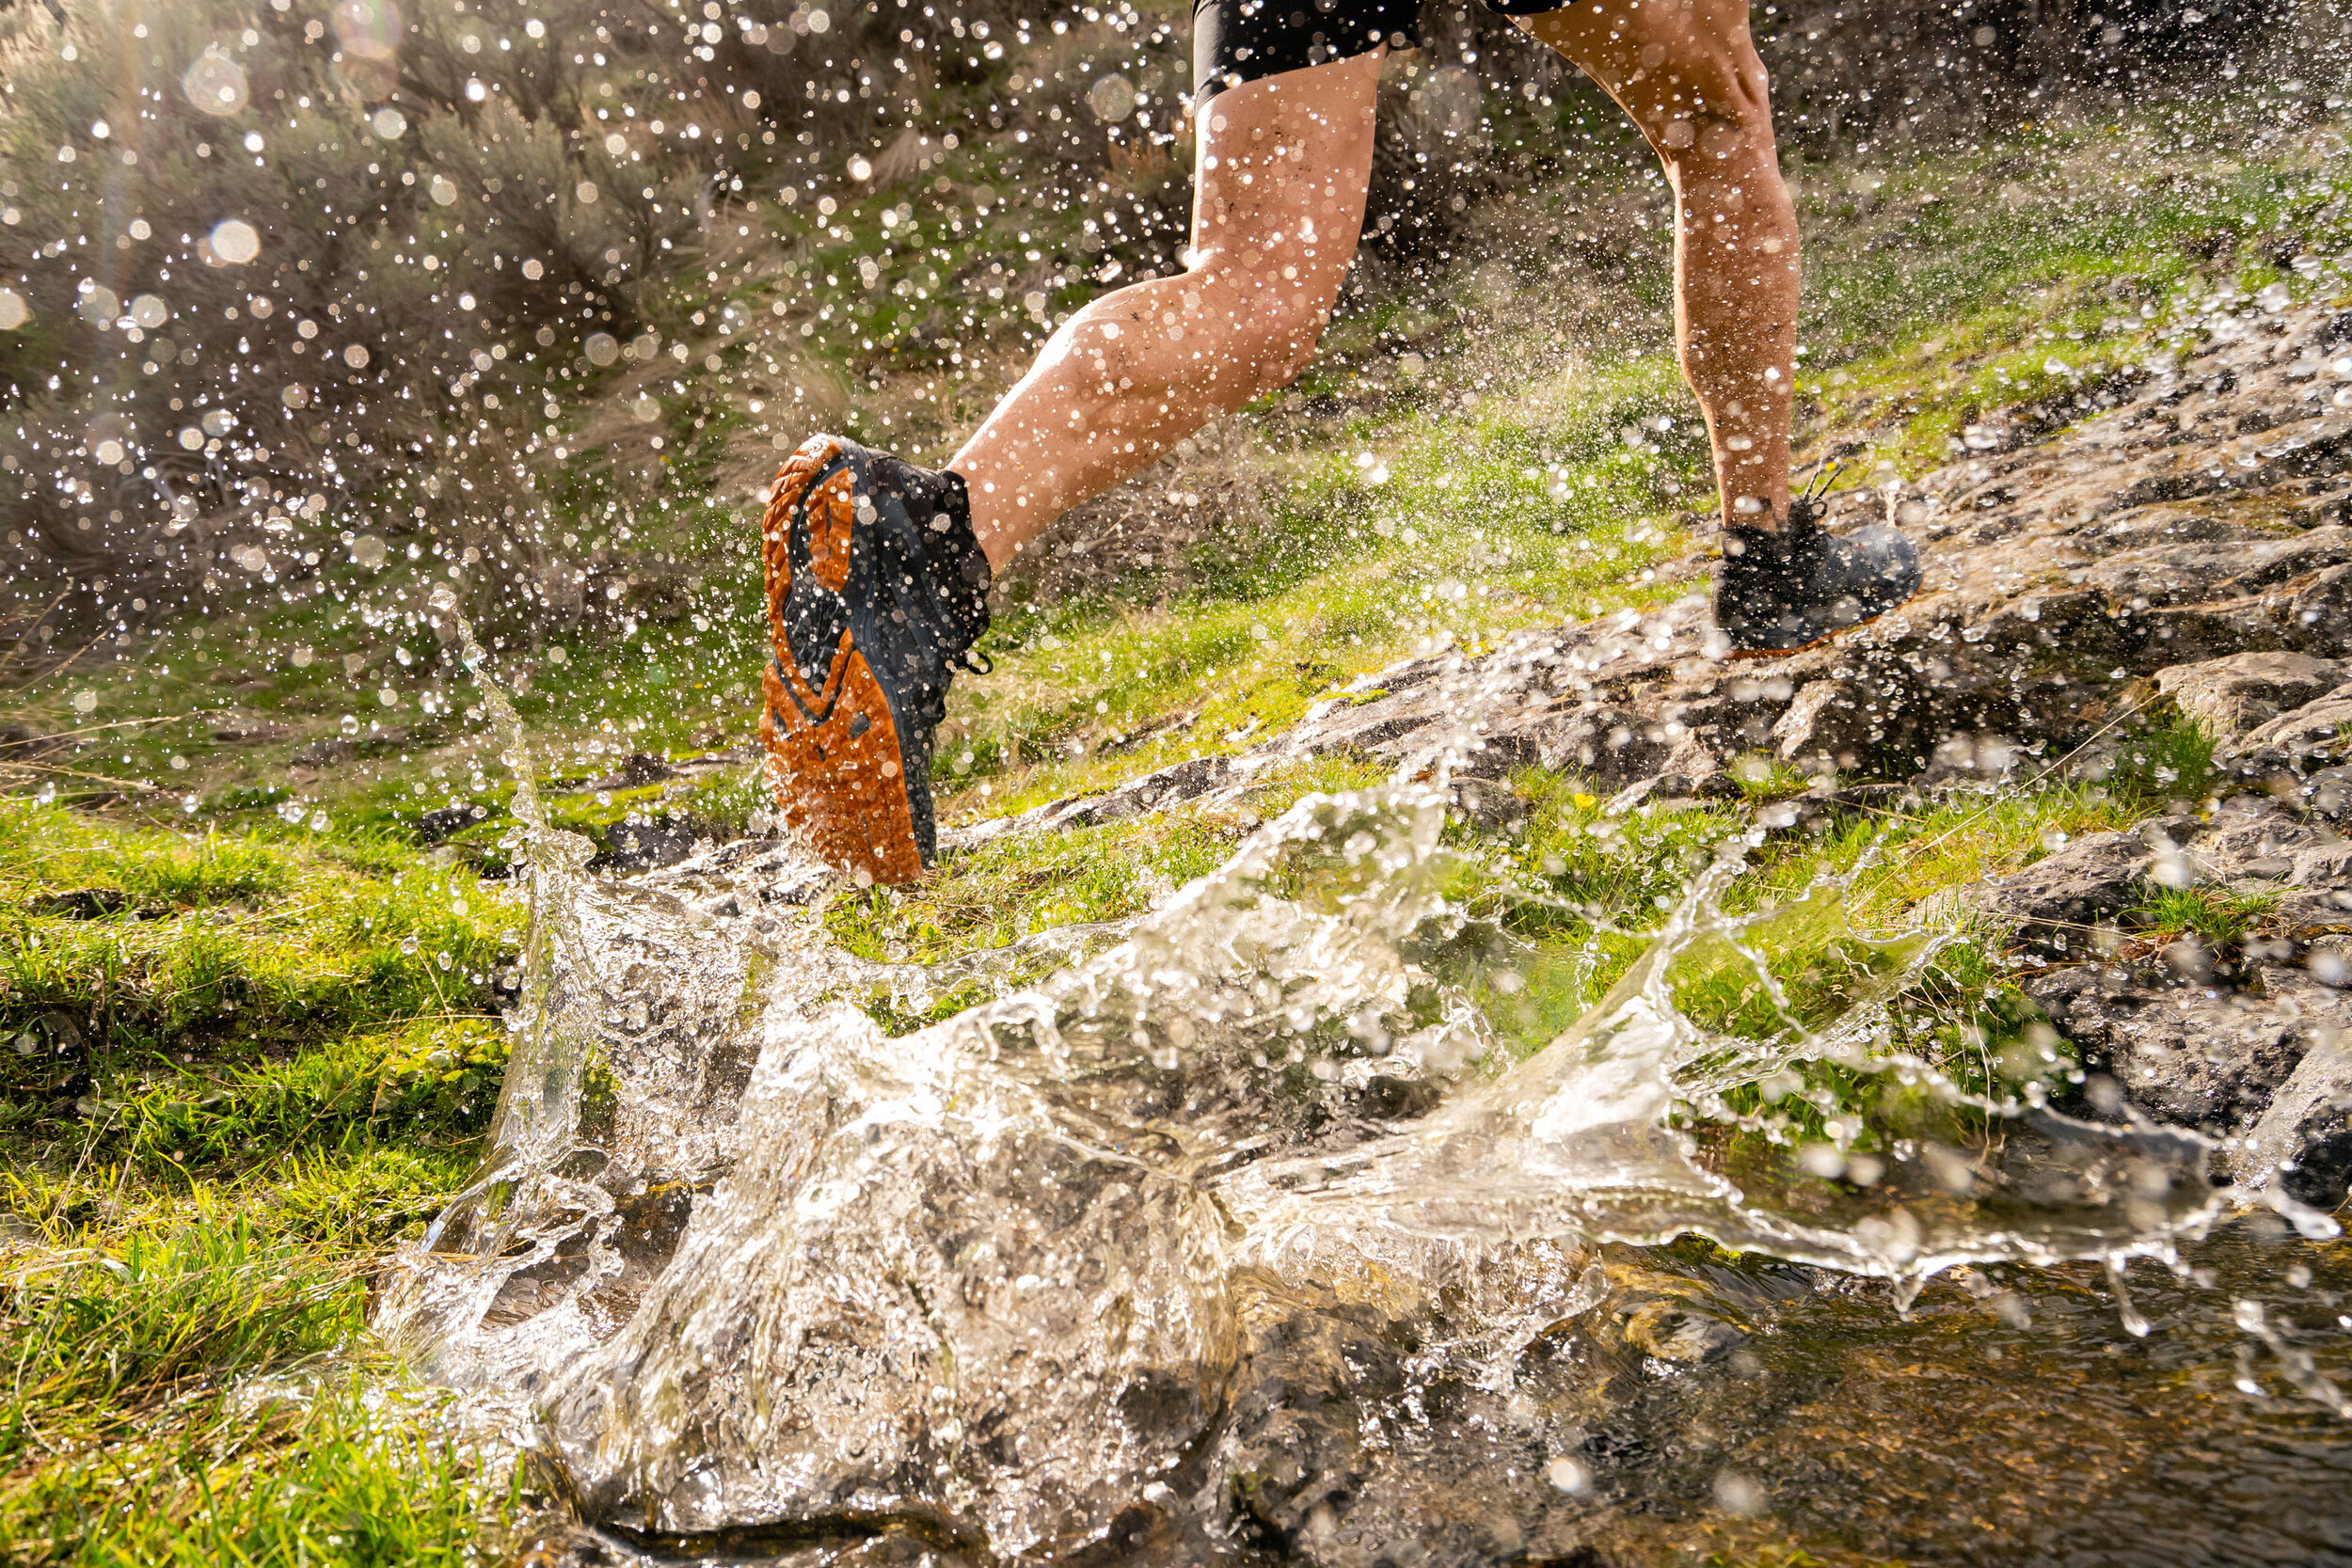  Adventure: Andrew O'Connor spashes through a creek while trail running near a waterfall in Yakima Canyon, Washington 